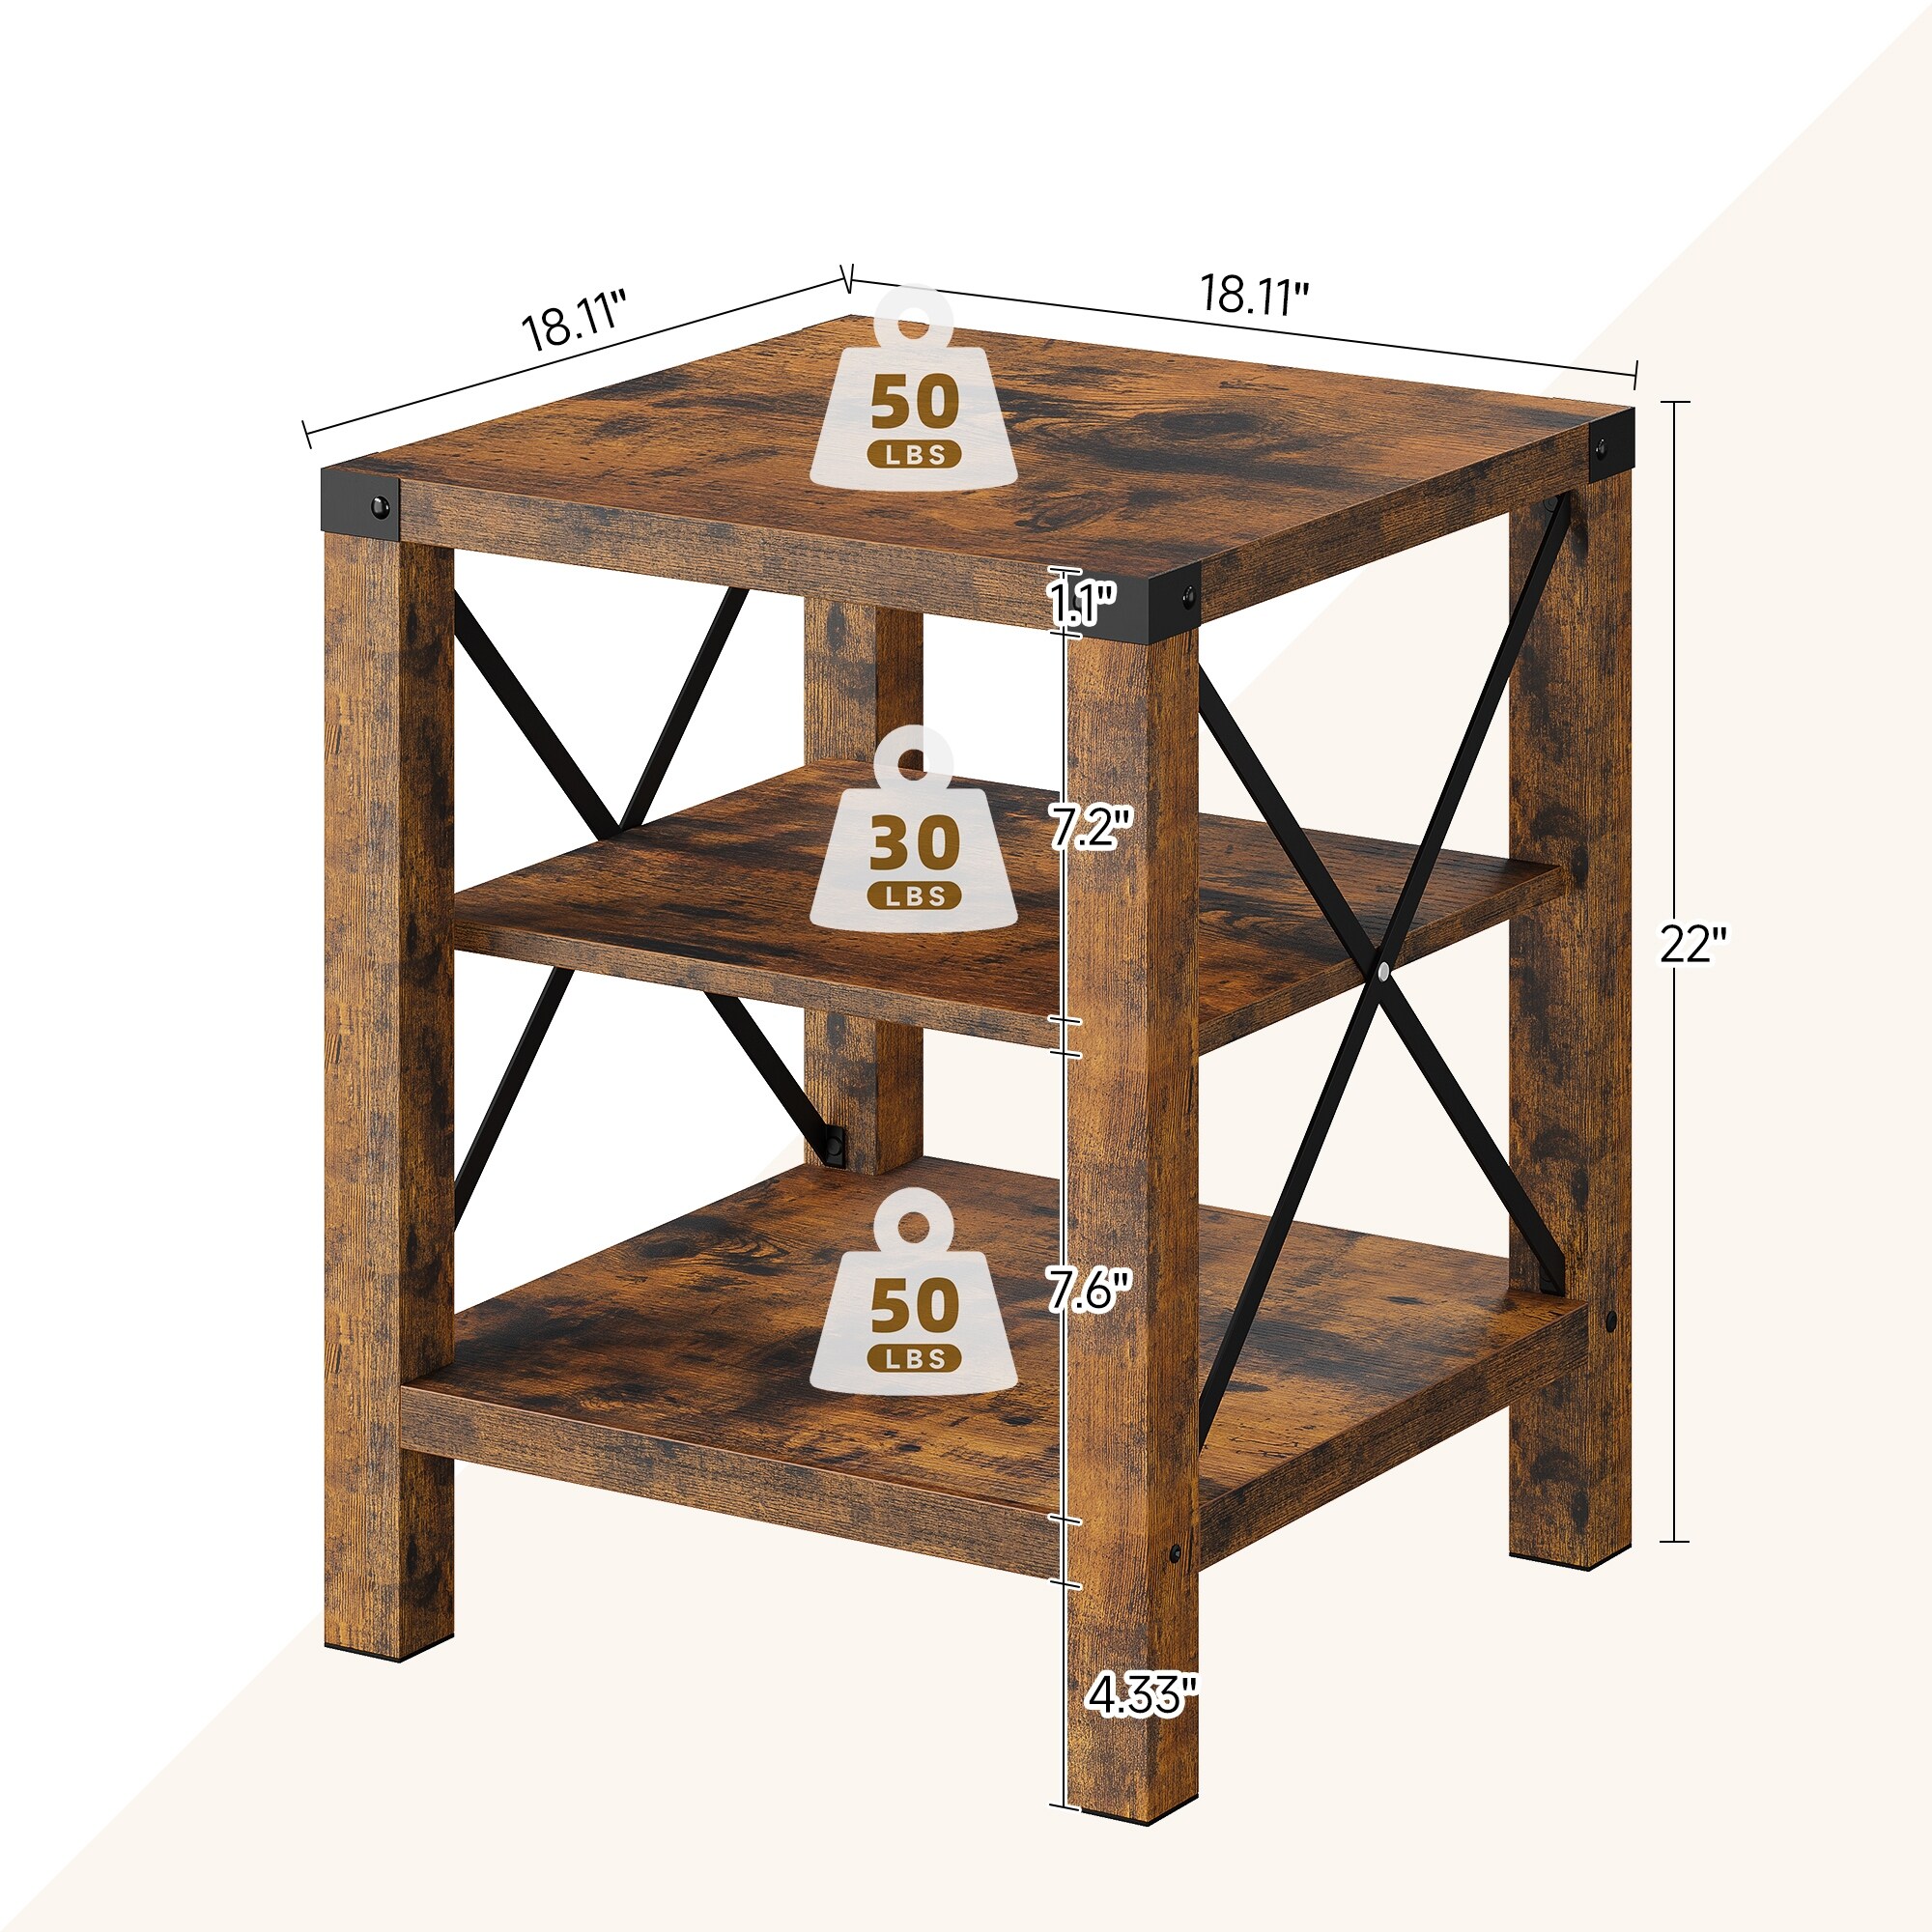 Set of 2 Rustic End Table Farmhouse Accent Cocktail Table for Living Room/ Bed Room - 18.1"D x 18.1"W x 22"H